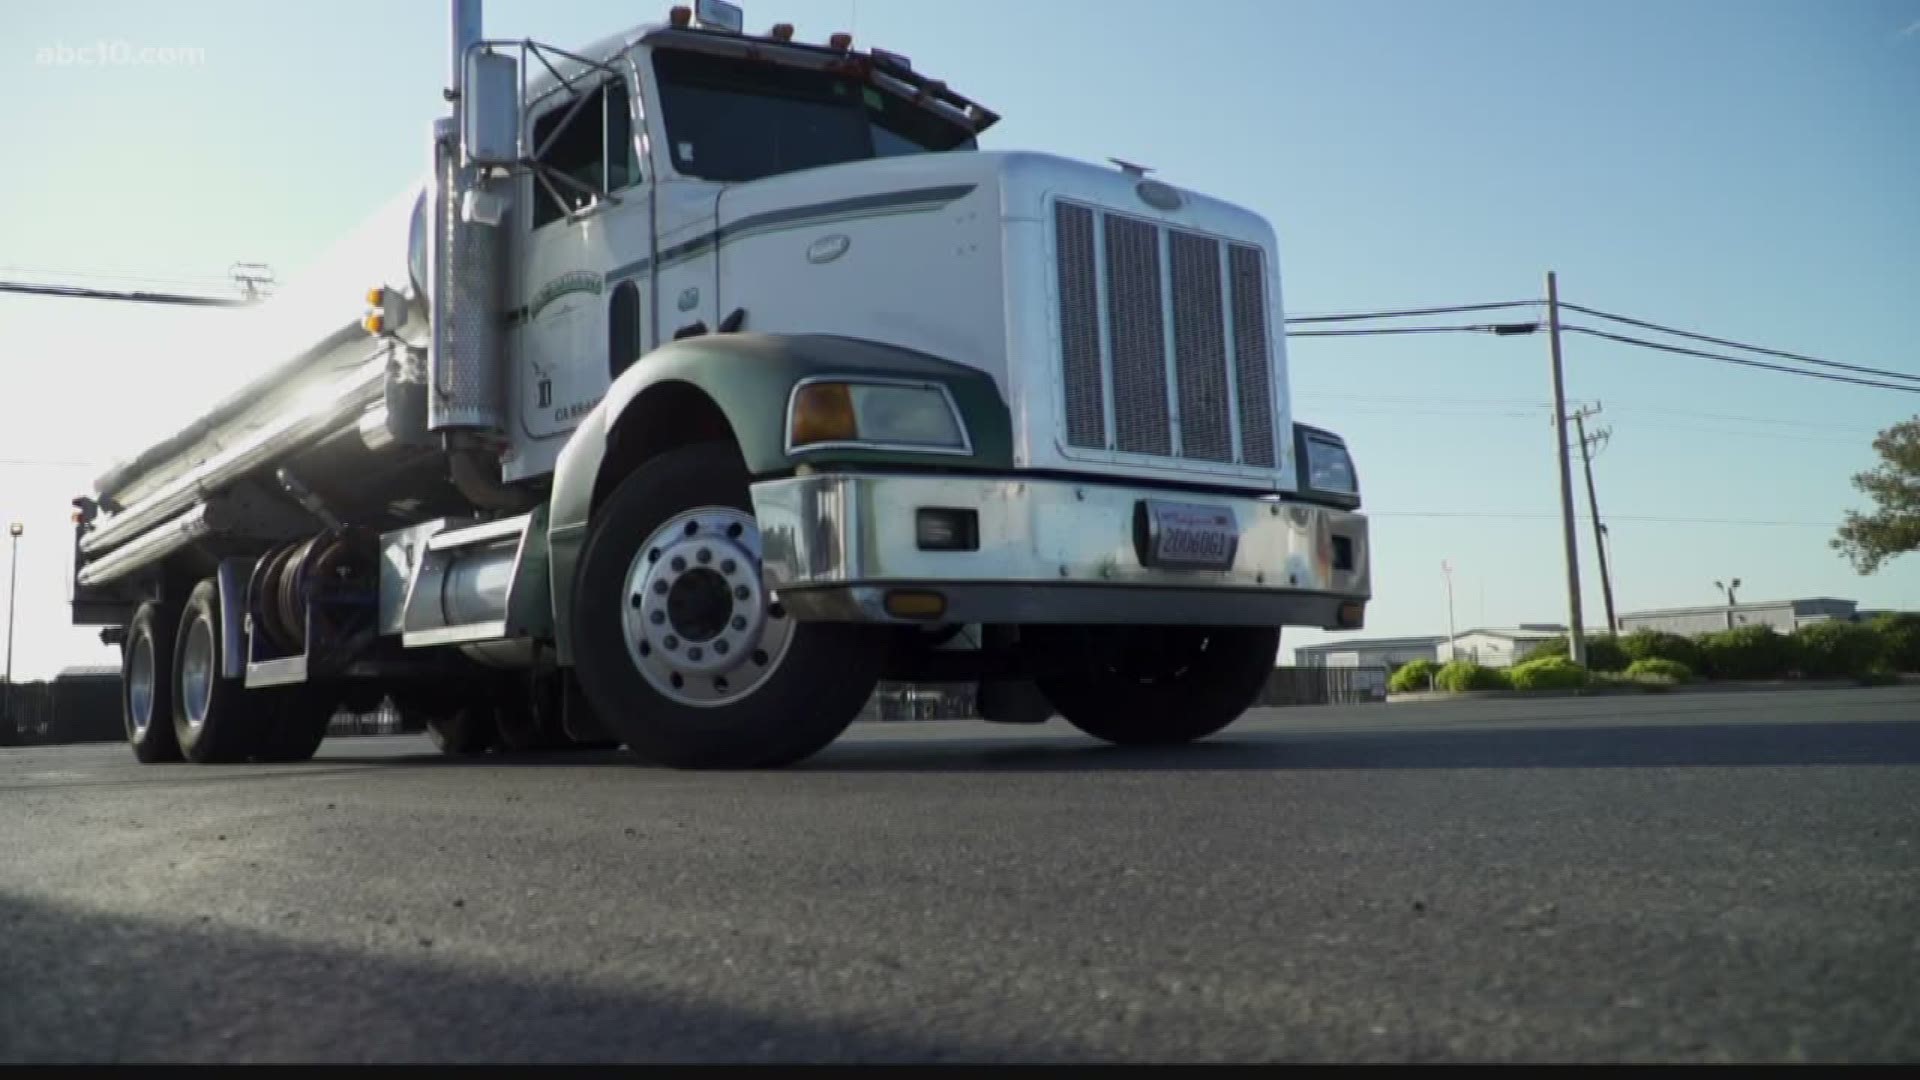 Sacramento Valley law enforcement announced a partnership Tuesday with the California Trucking Association to stop human trafficking.